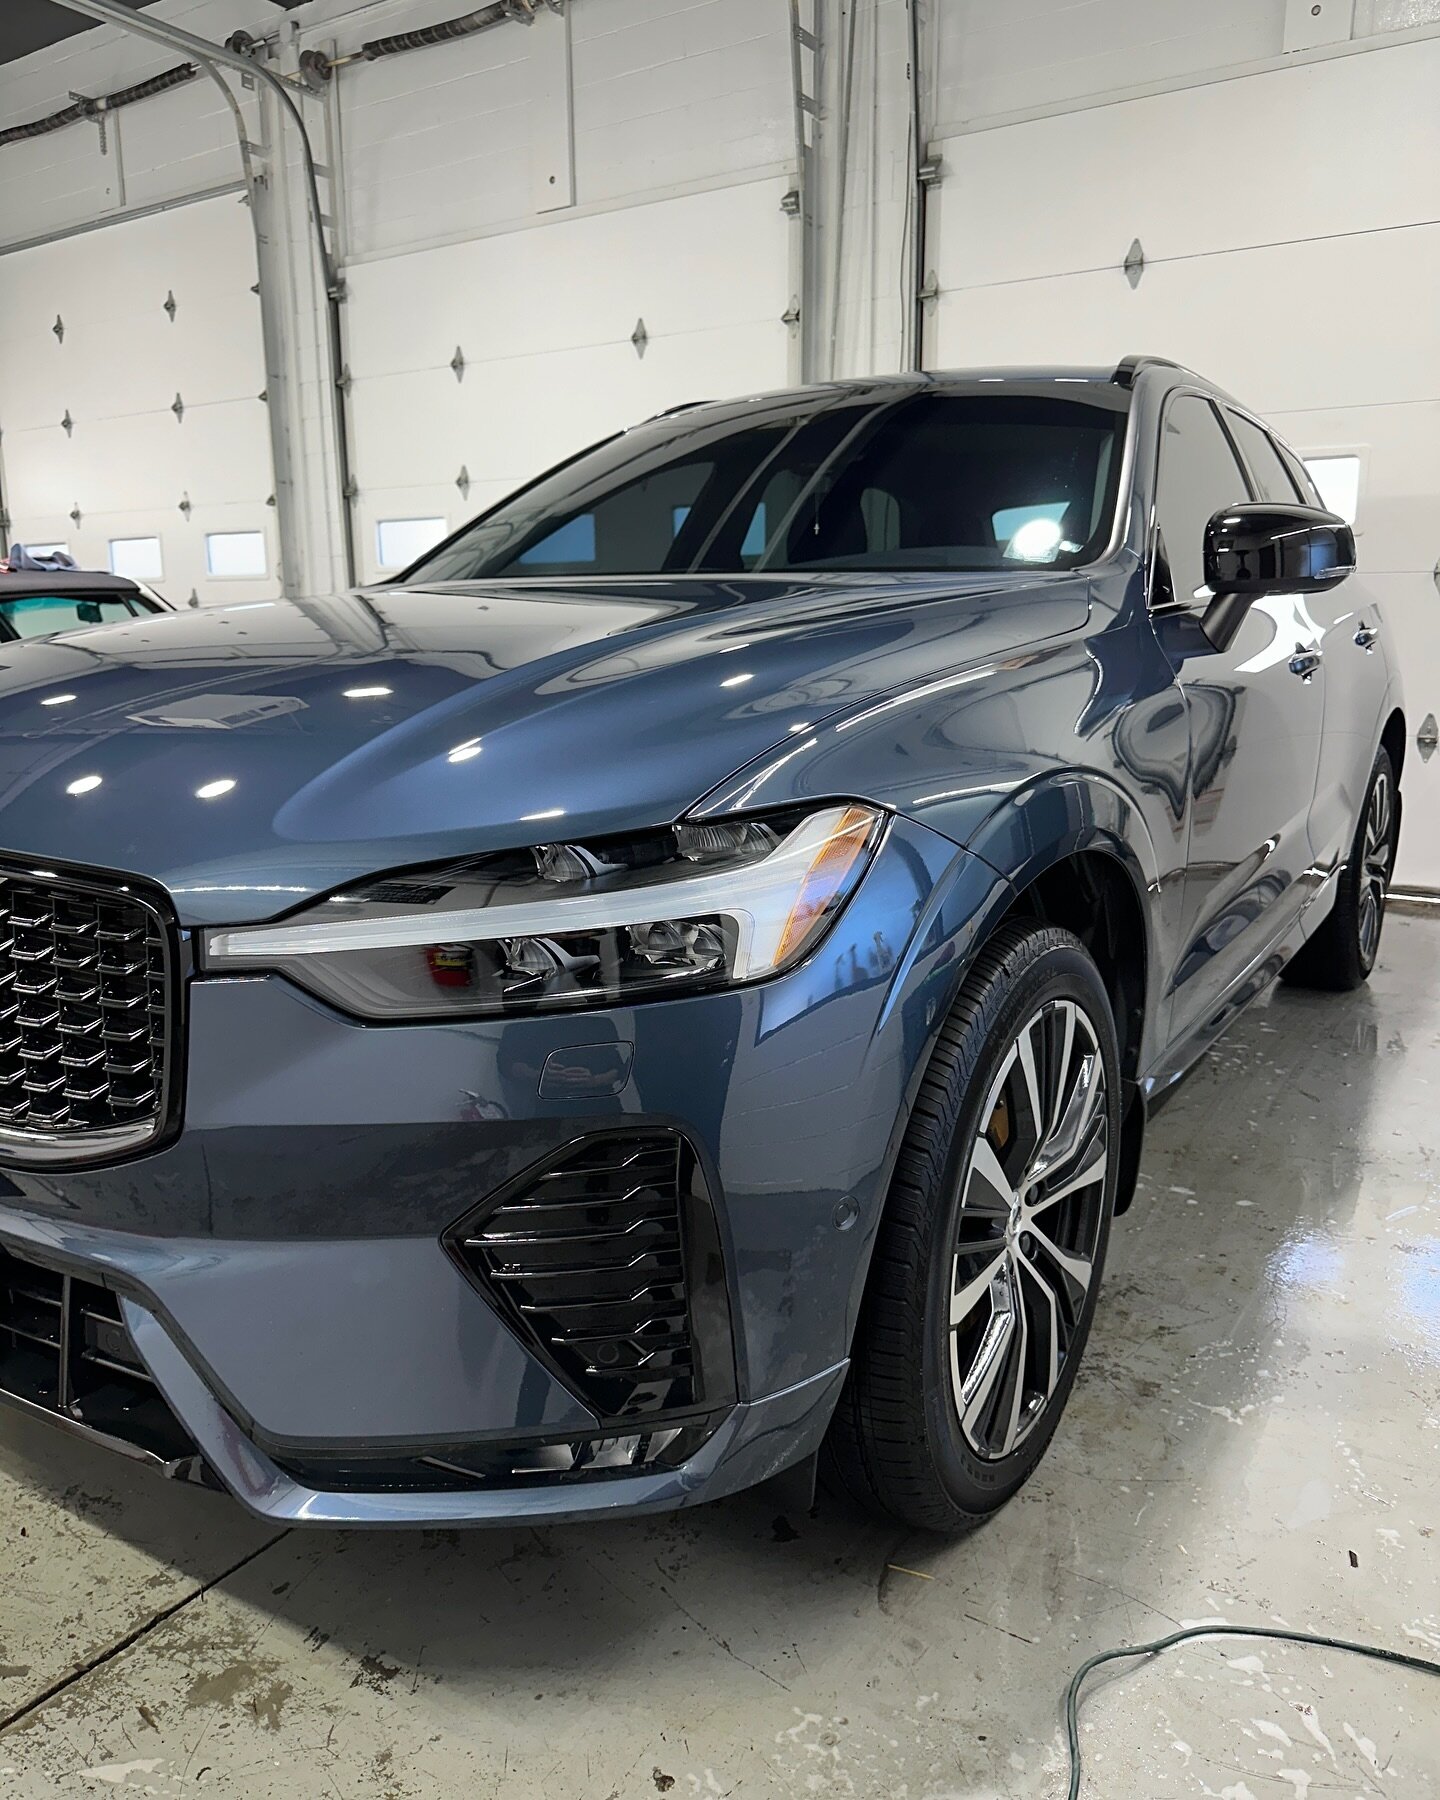 Full hood and bumper with partial fenders wrapped in @xpel #fusion #ppf. Paint Protection Film packages we install most often are:

1. Full Front: This is our most popular package and perfect for daily drivers because it only covers the area that are